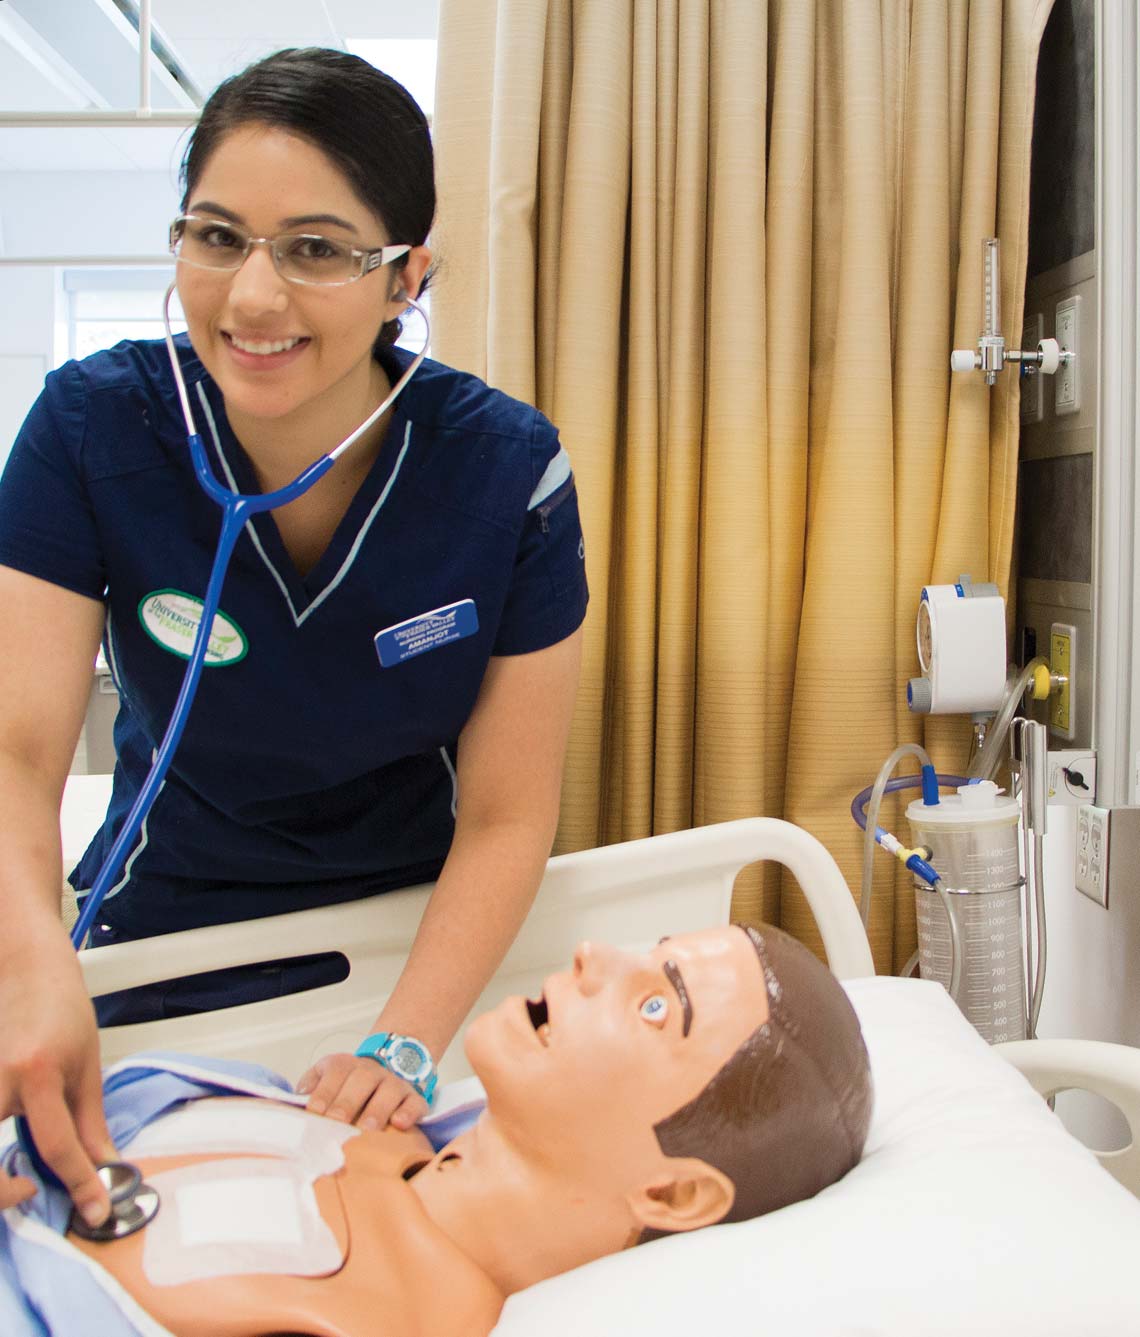 Make a healthy difference as a Registered Nurse